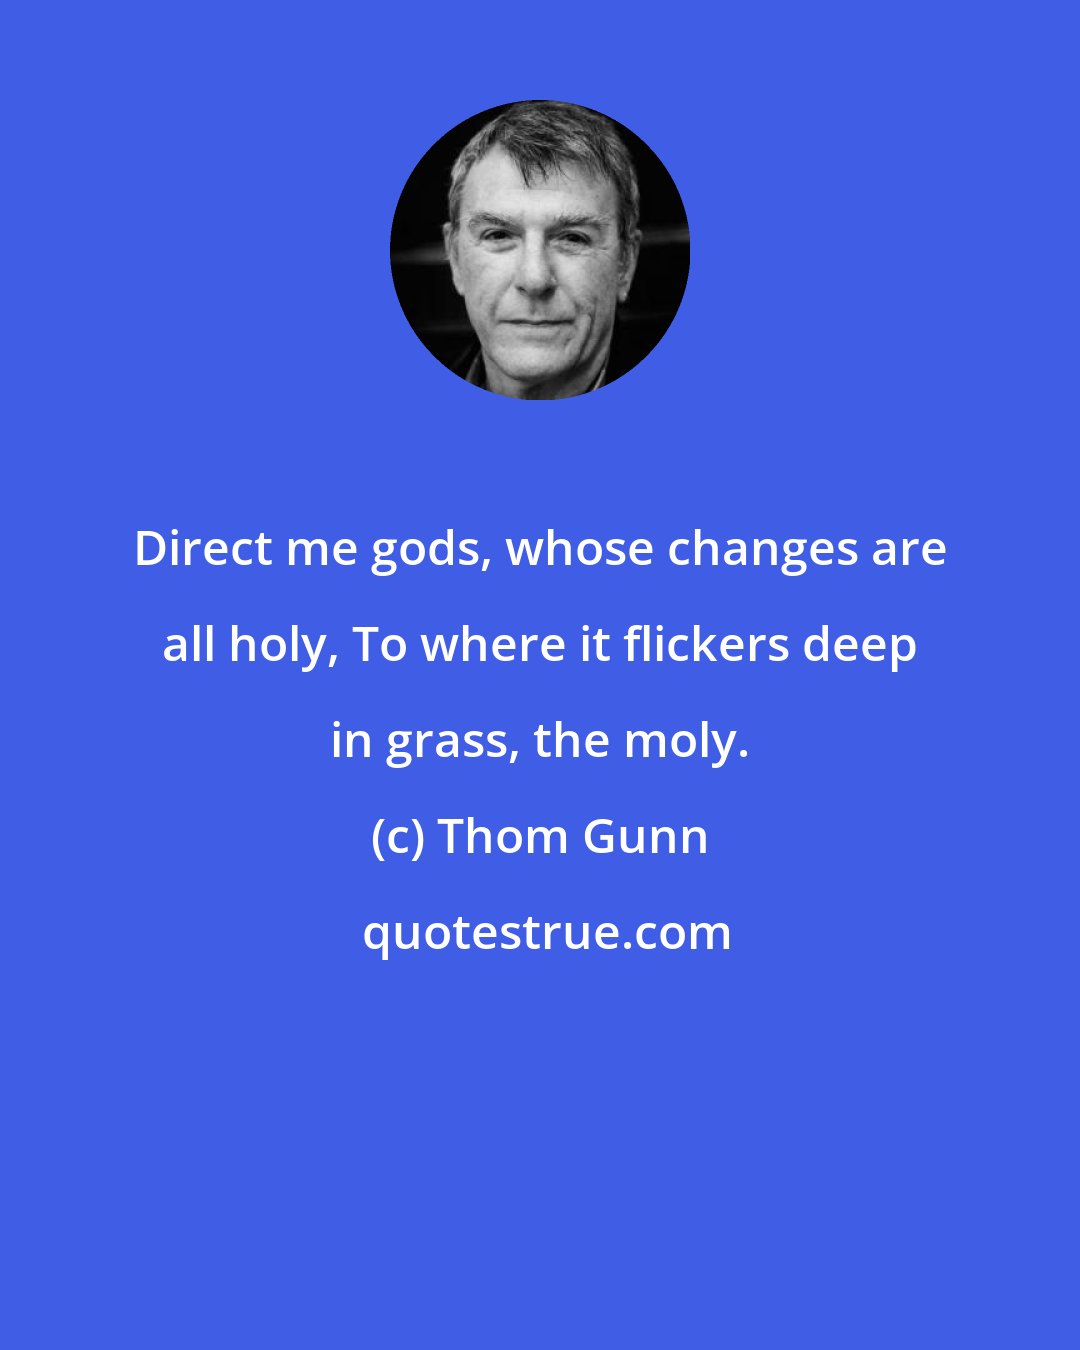 Thom Gunn: Direct me gods, whose changes are all holy, To where it flickers deep in grass, the moly.